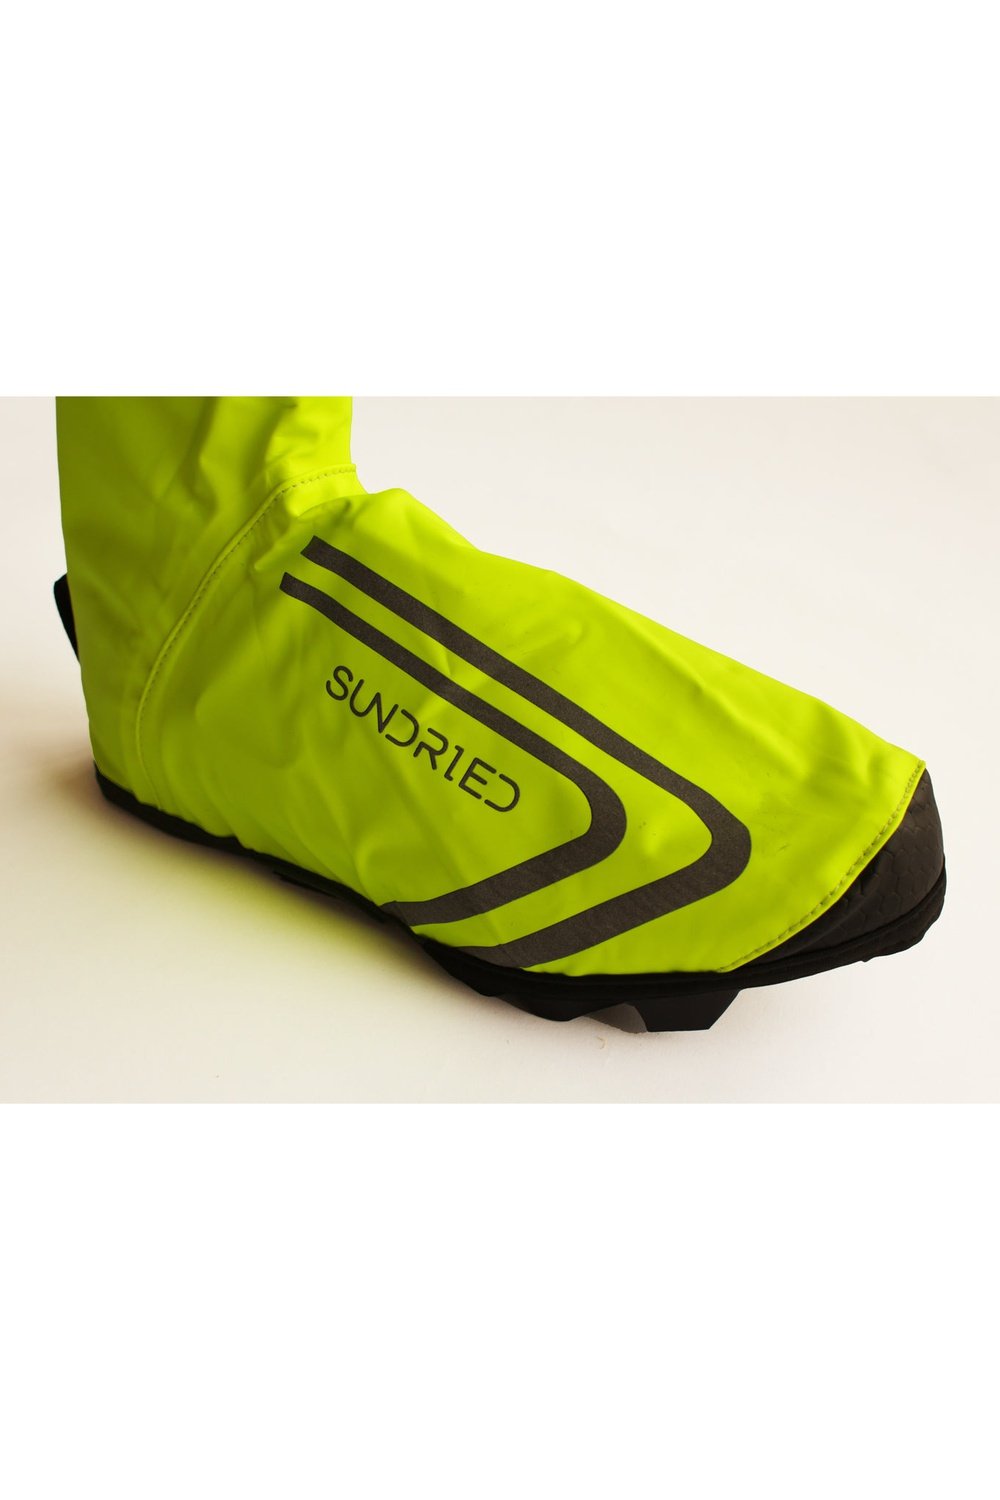 Sundried LD2 Light Duty Shoe Covers Cover Activewear